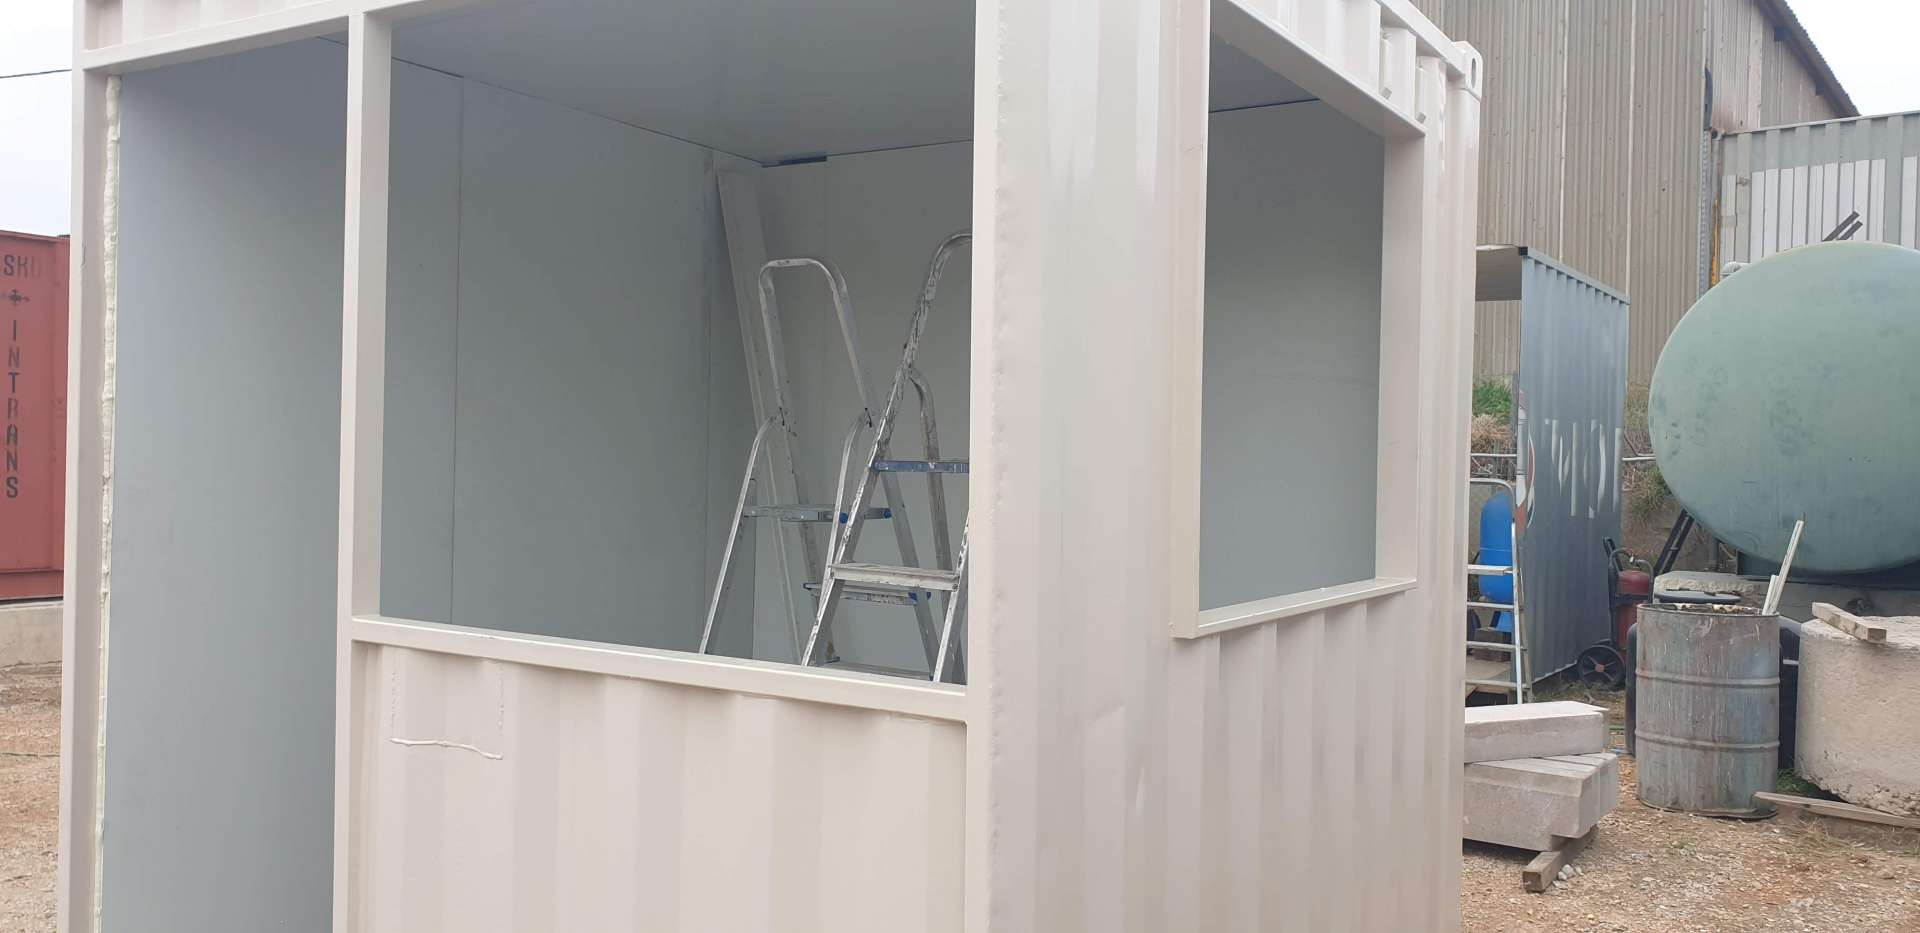 creating a guardhouse from shipping container